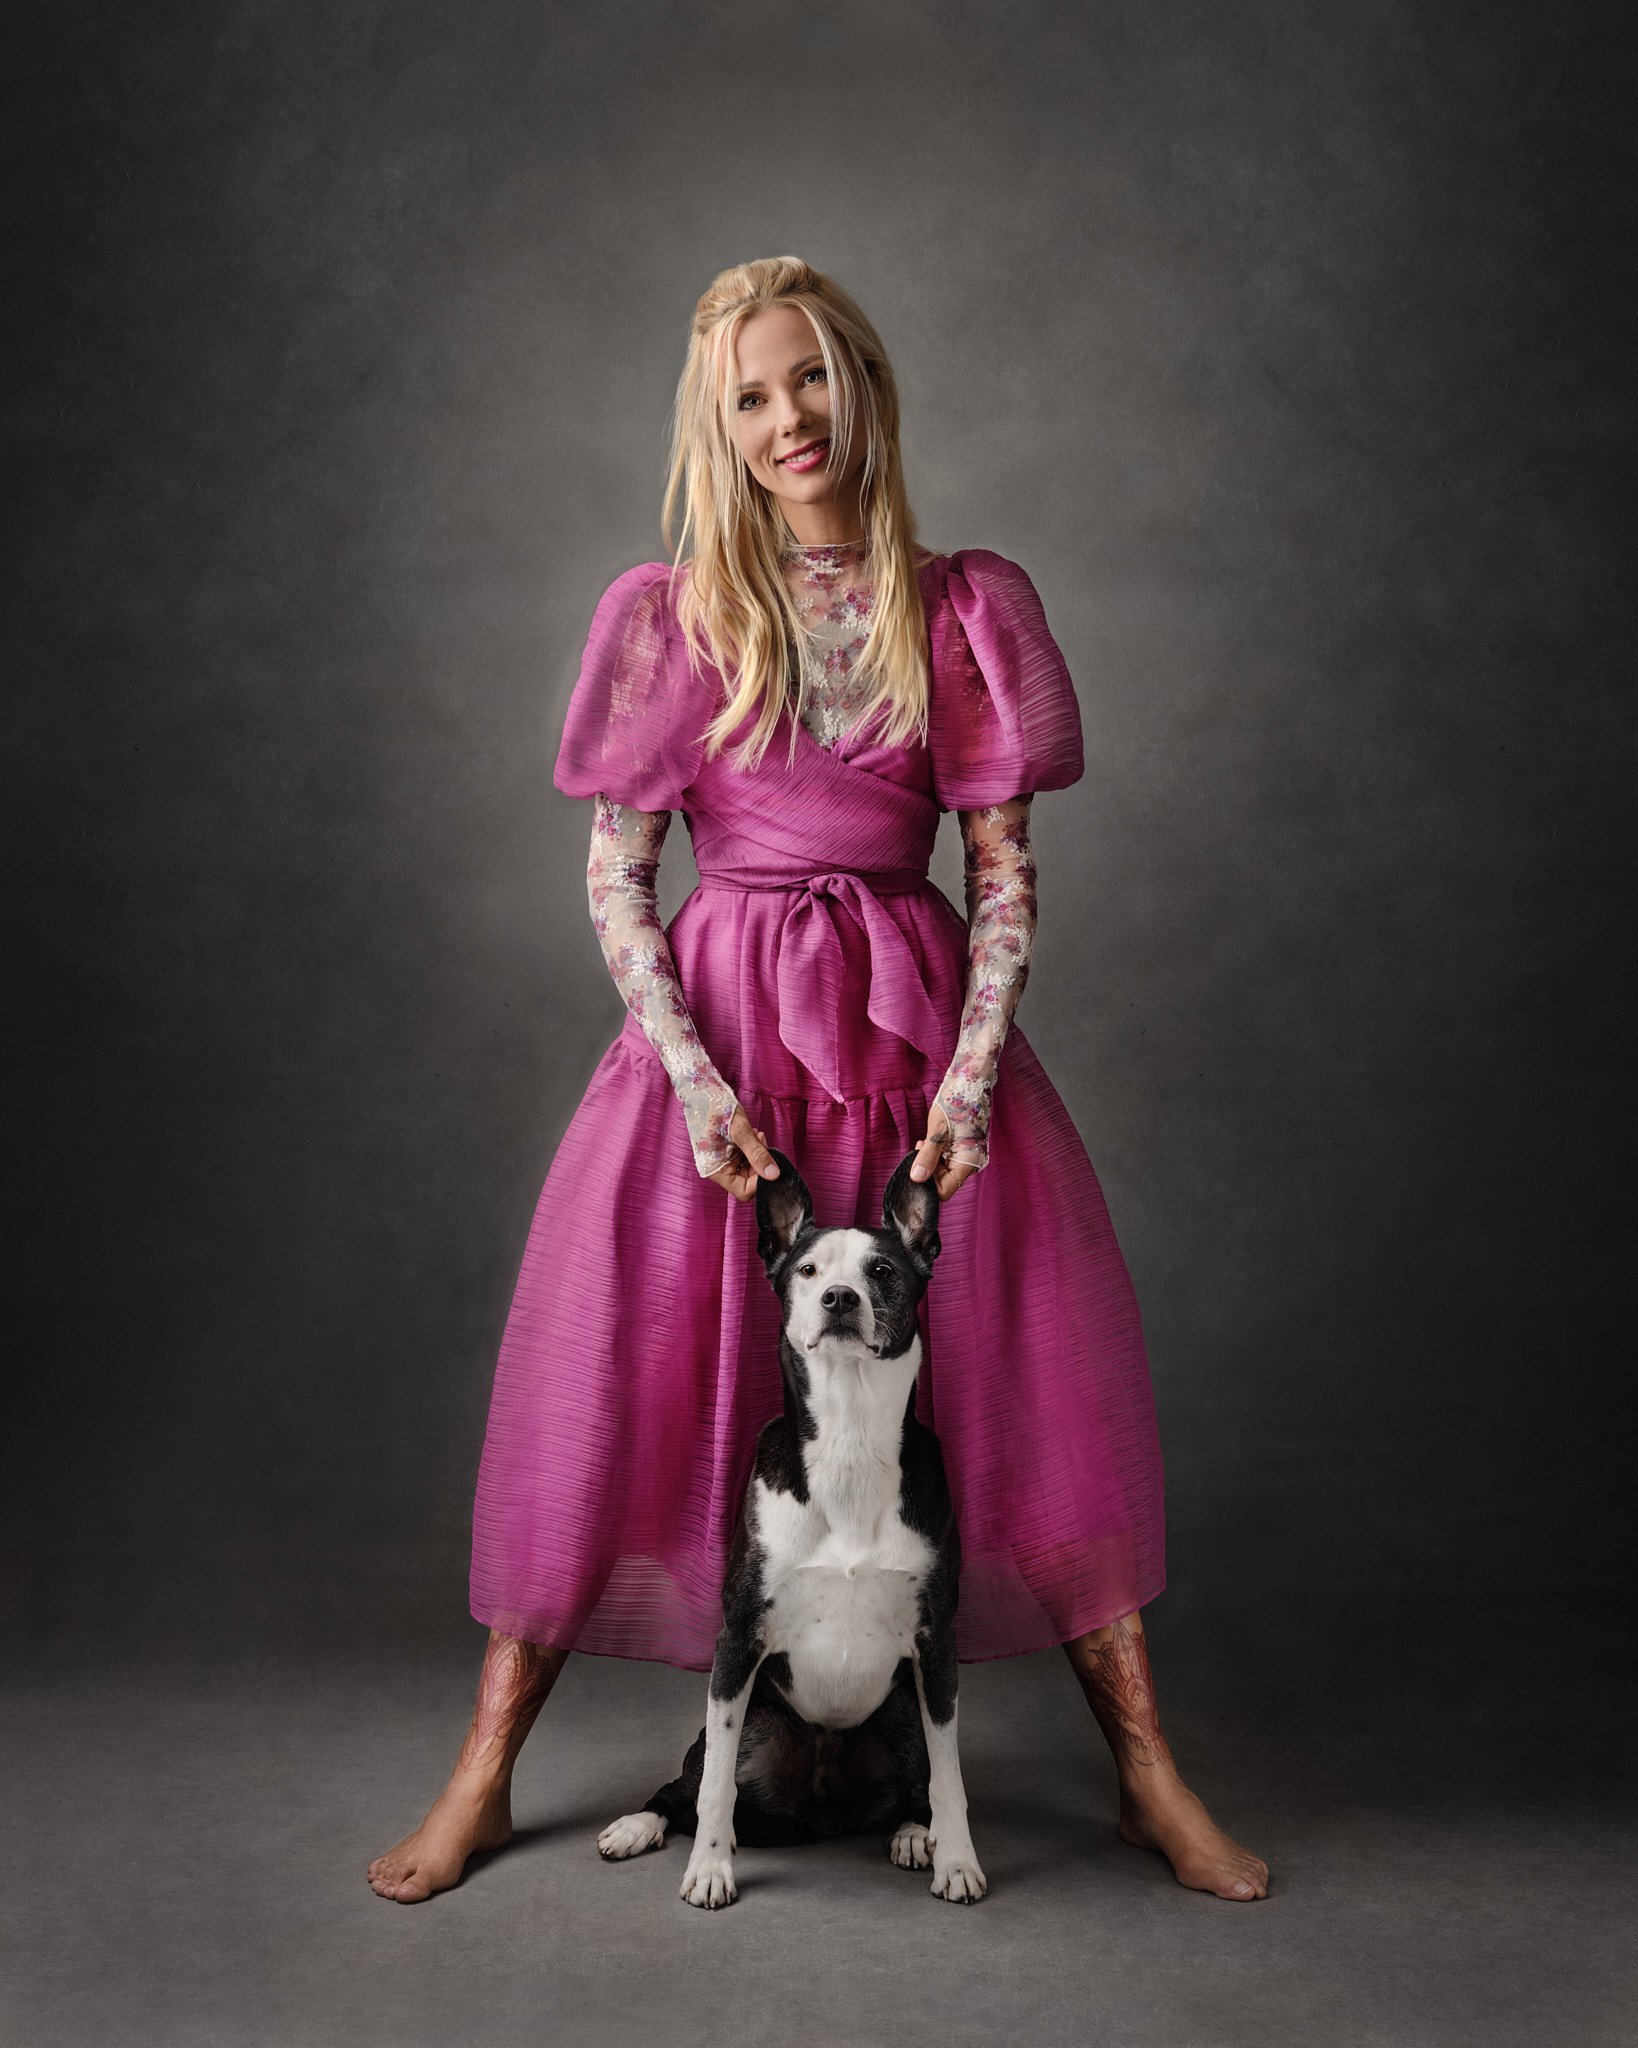 blonde-woman-with-black-and-white-dog-portrait-standing-with-pink-dress.jpg